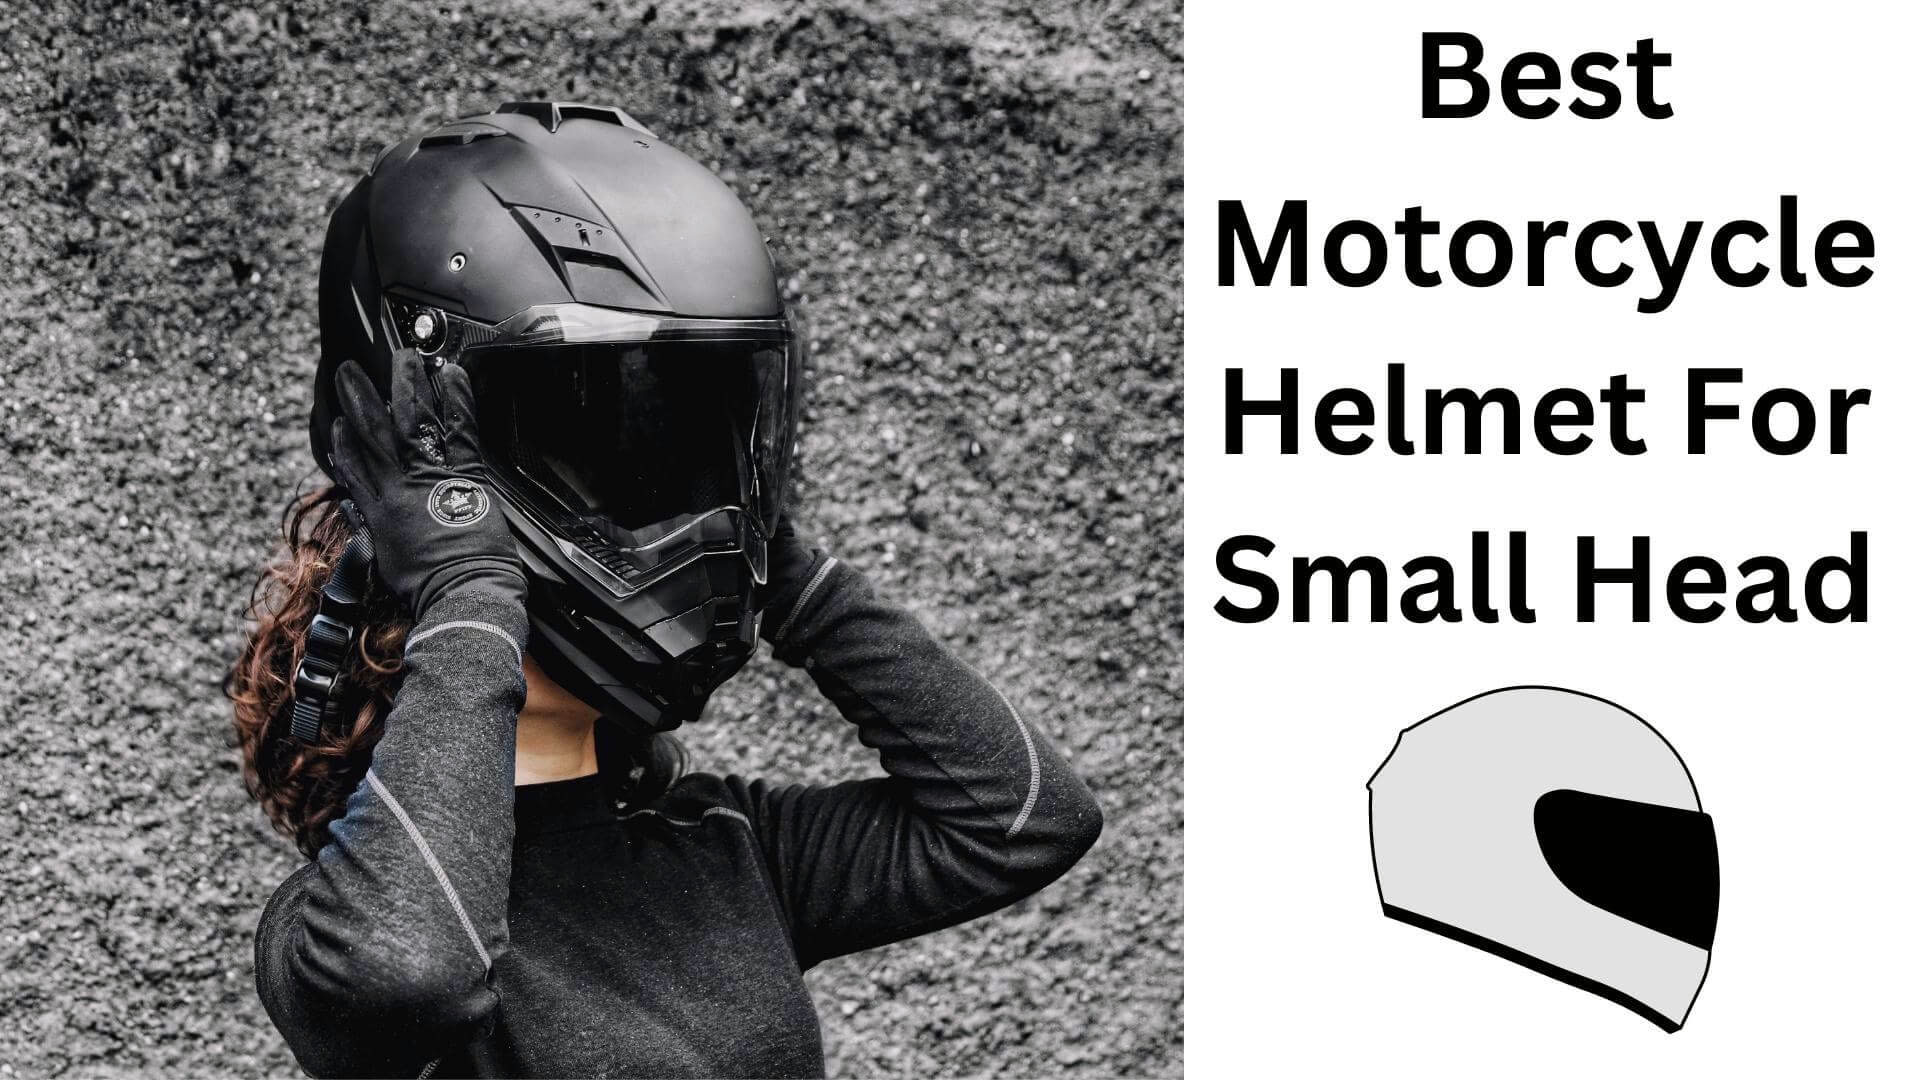 Which Is The Best Motorcycle Helmet For Small Head?